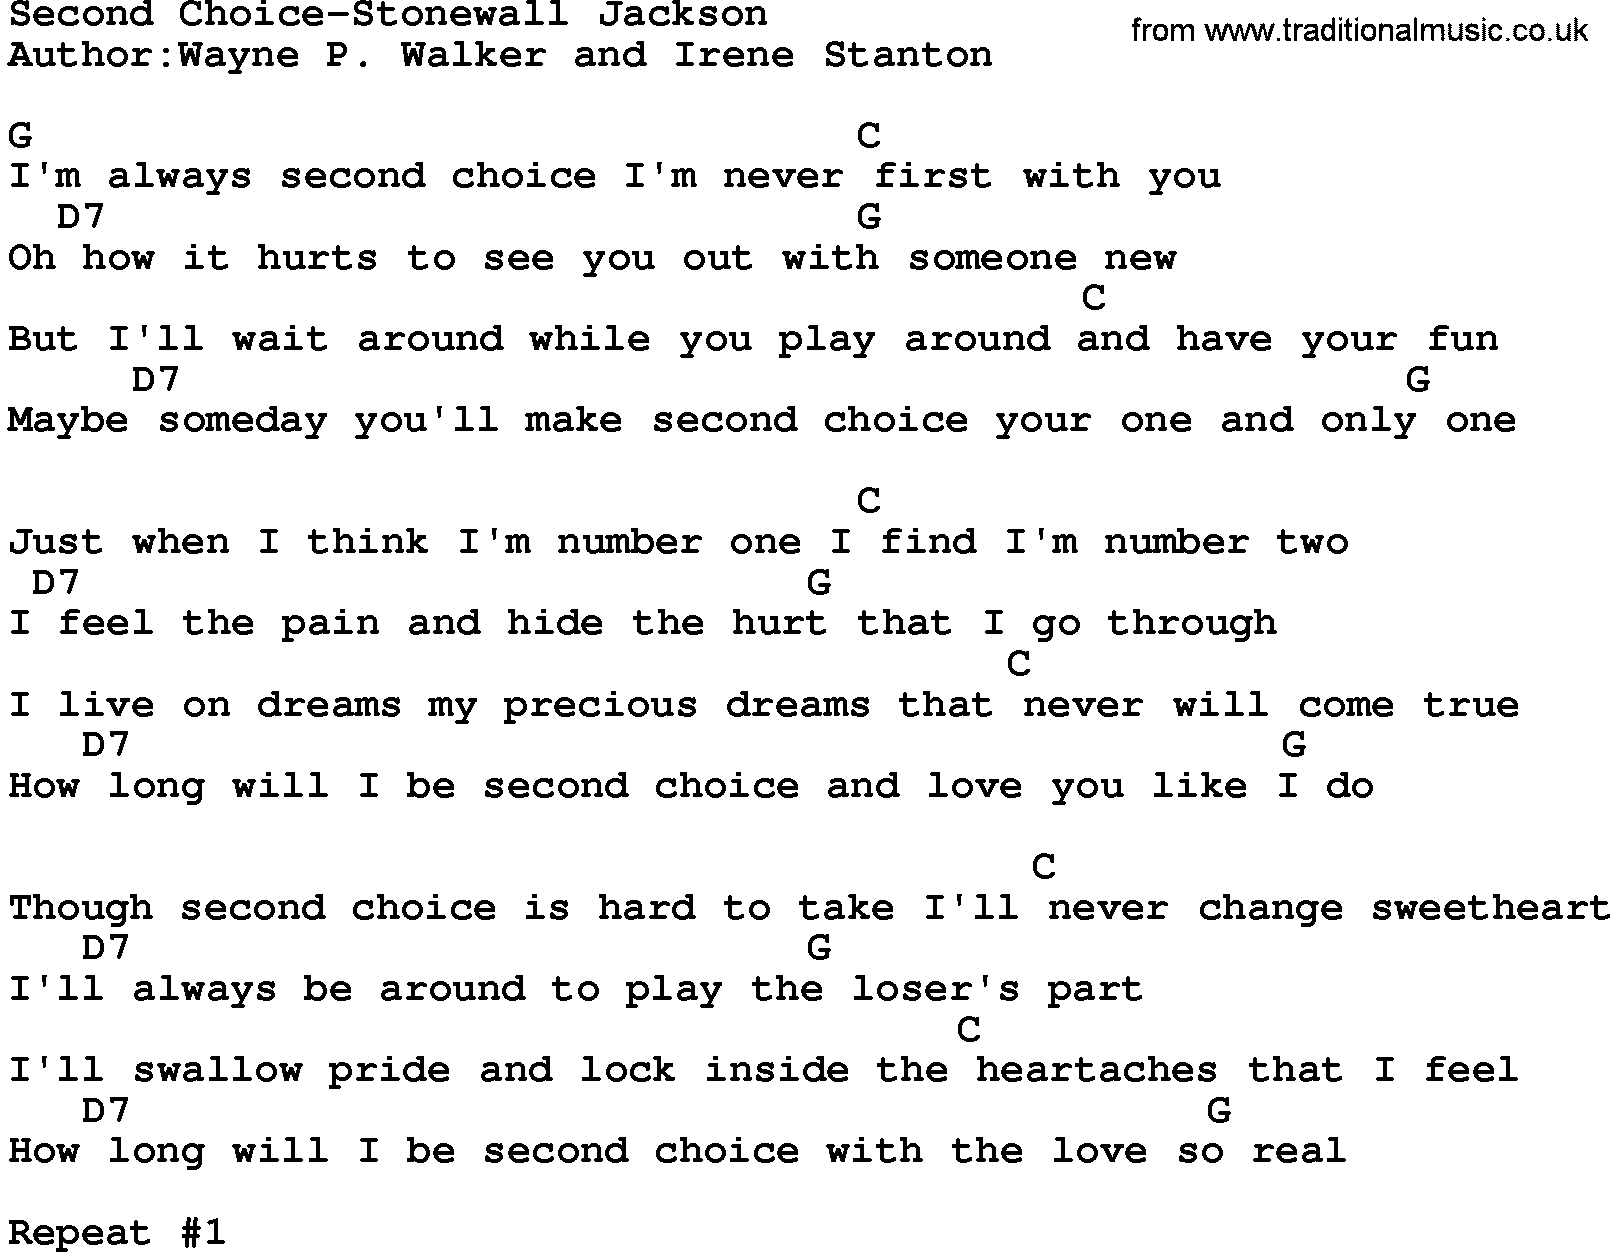 Country music song: Second Choice-Stonewall Jackson lyrics and chords